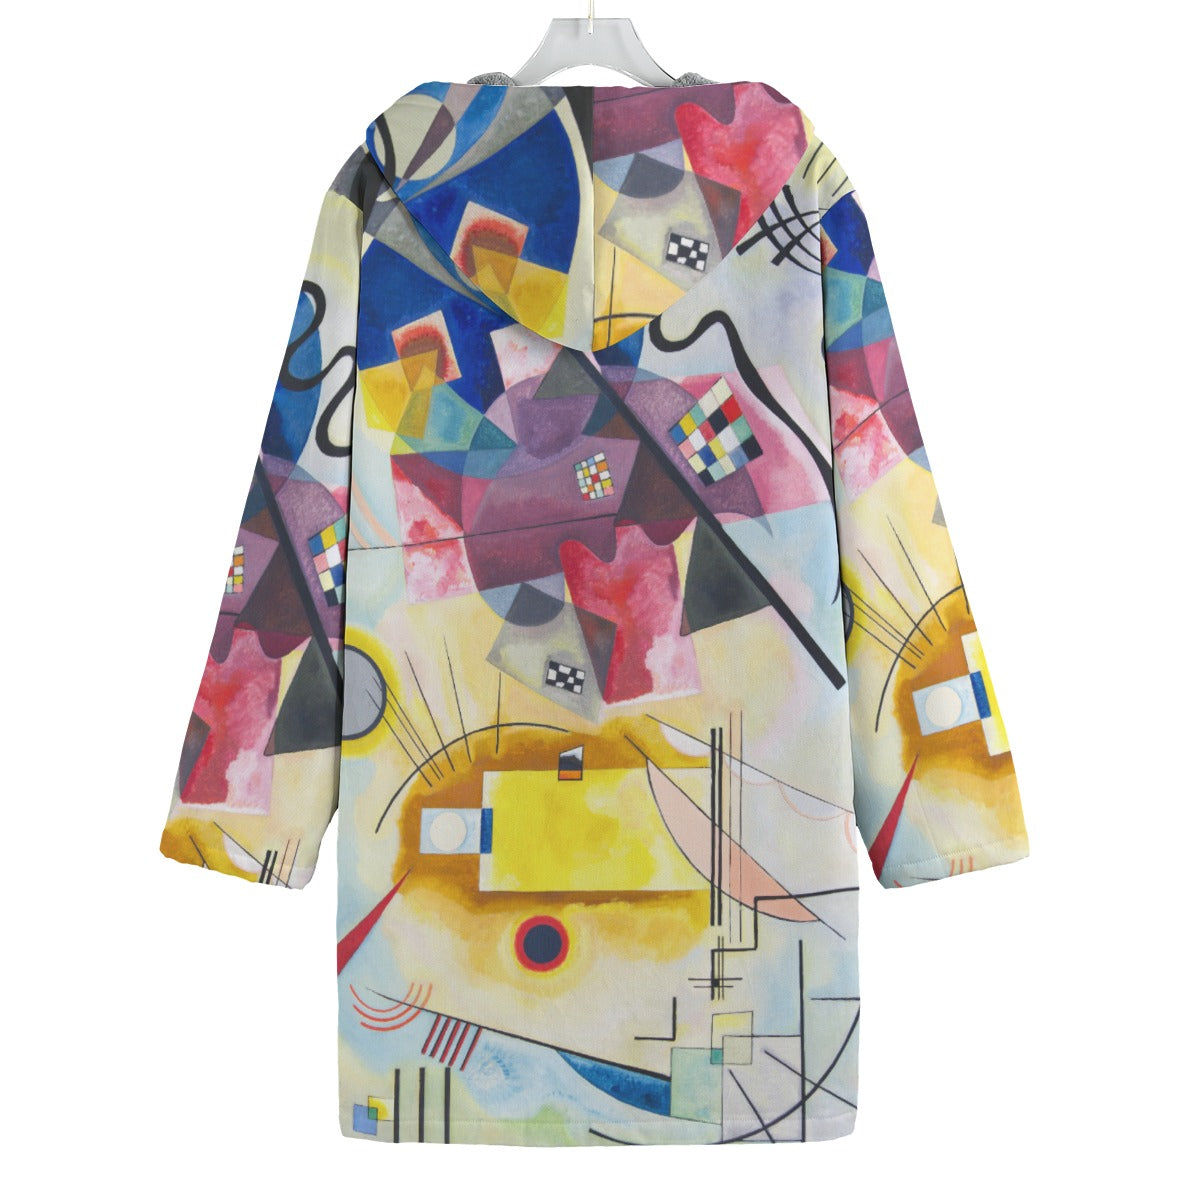 Colorful men's outerwear inspired by Kandinsky